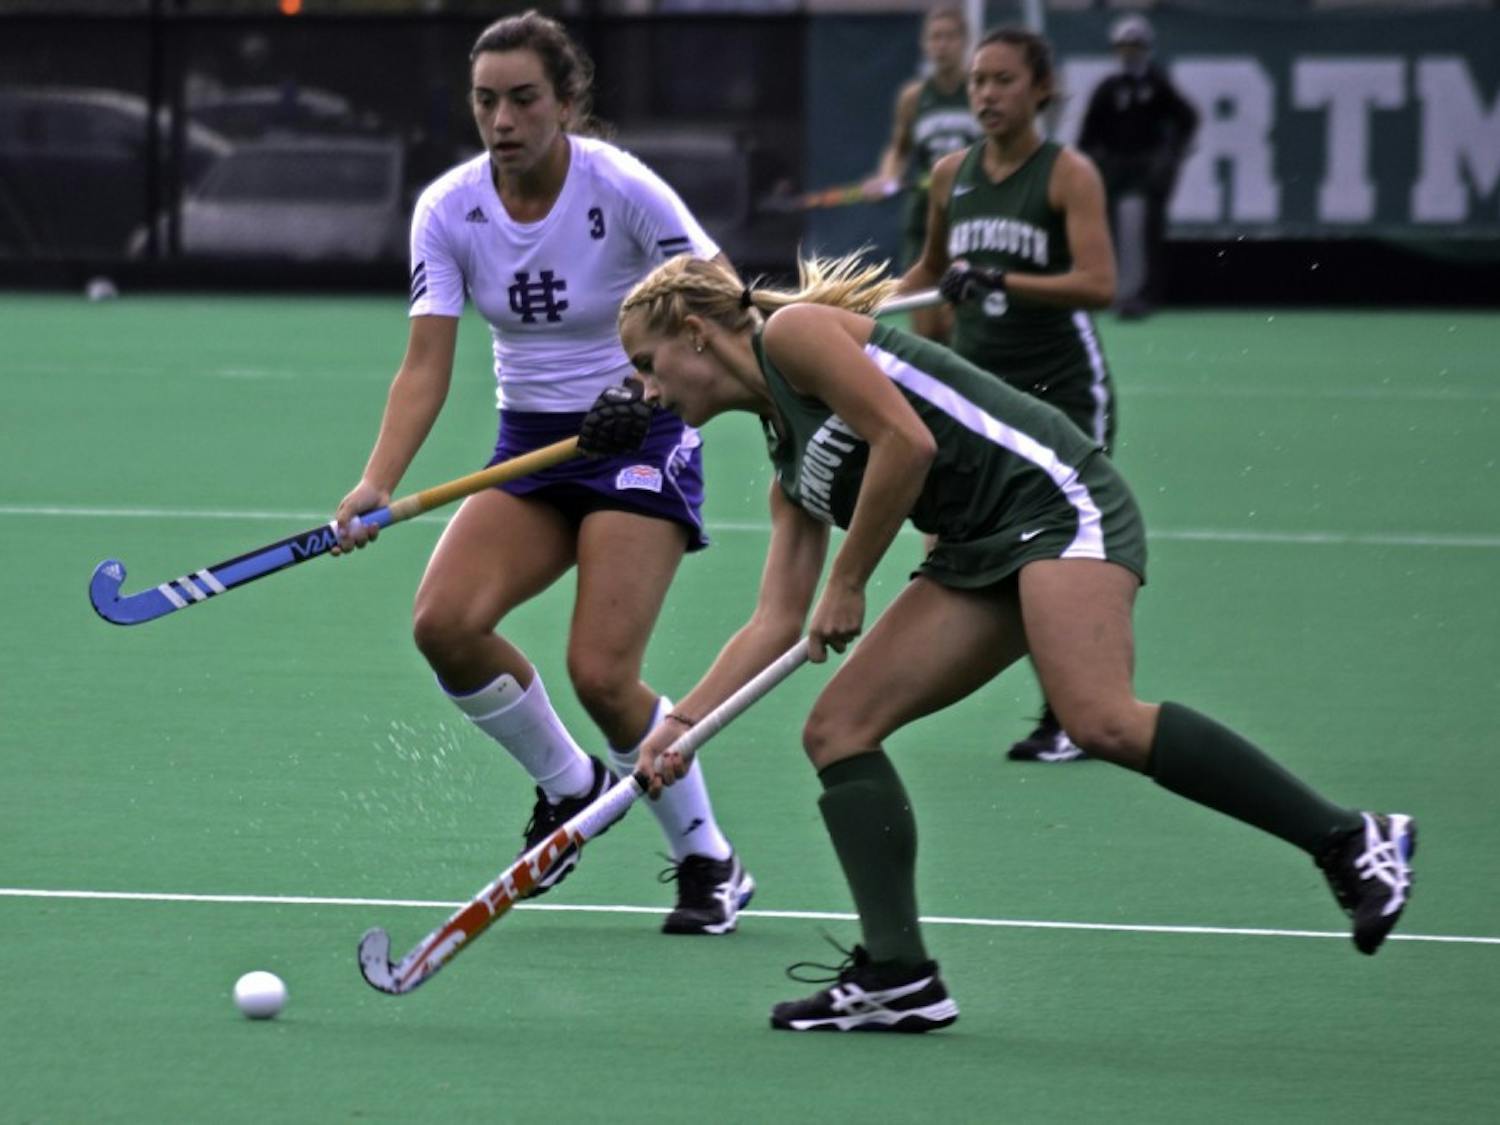 The field hockey team has posted a 1-4 record since a 5-4 OT win over Holy Cross Homecoming Weekend.